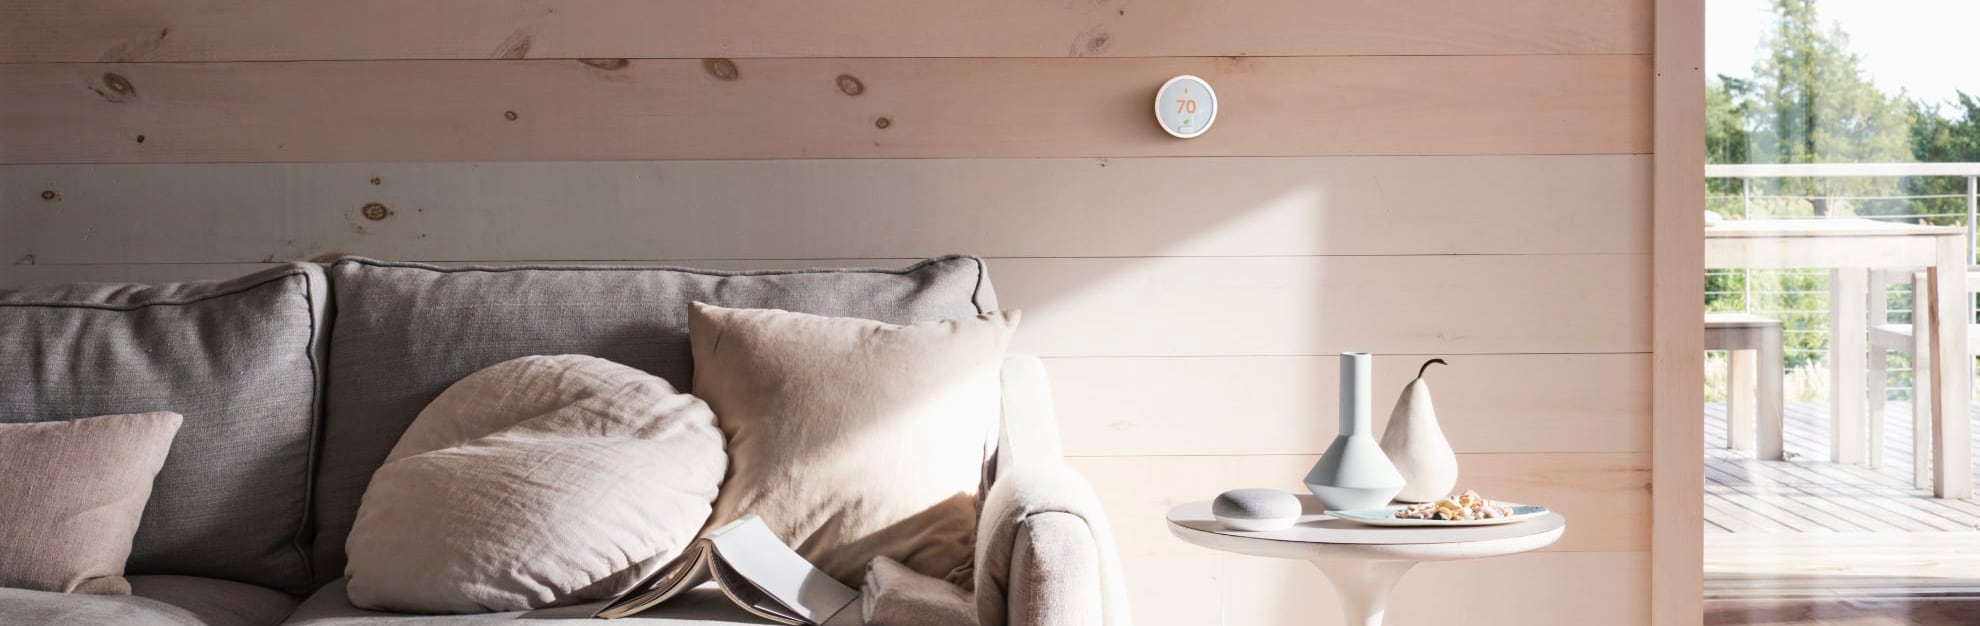 Vivint Home Automation in Bend